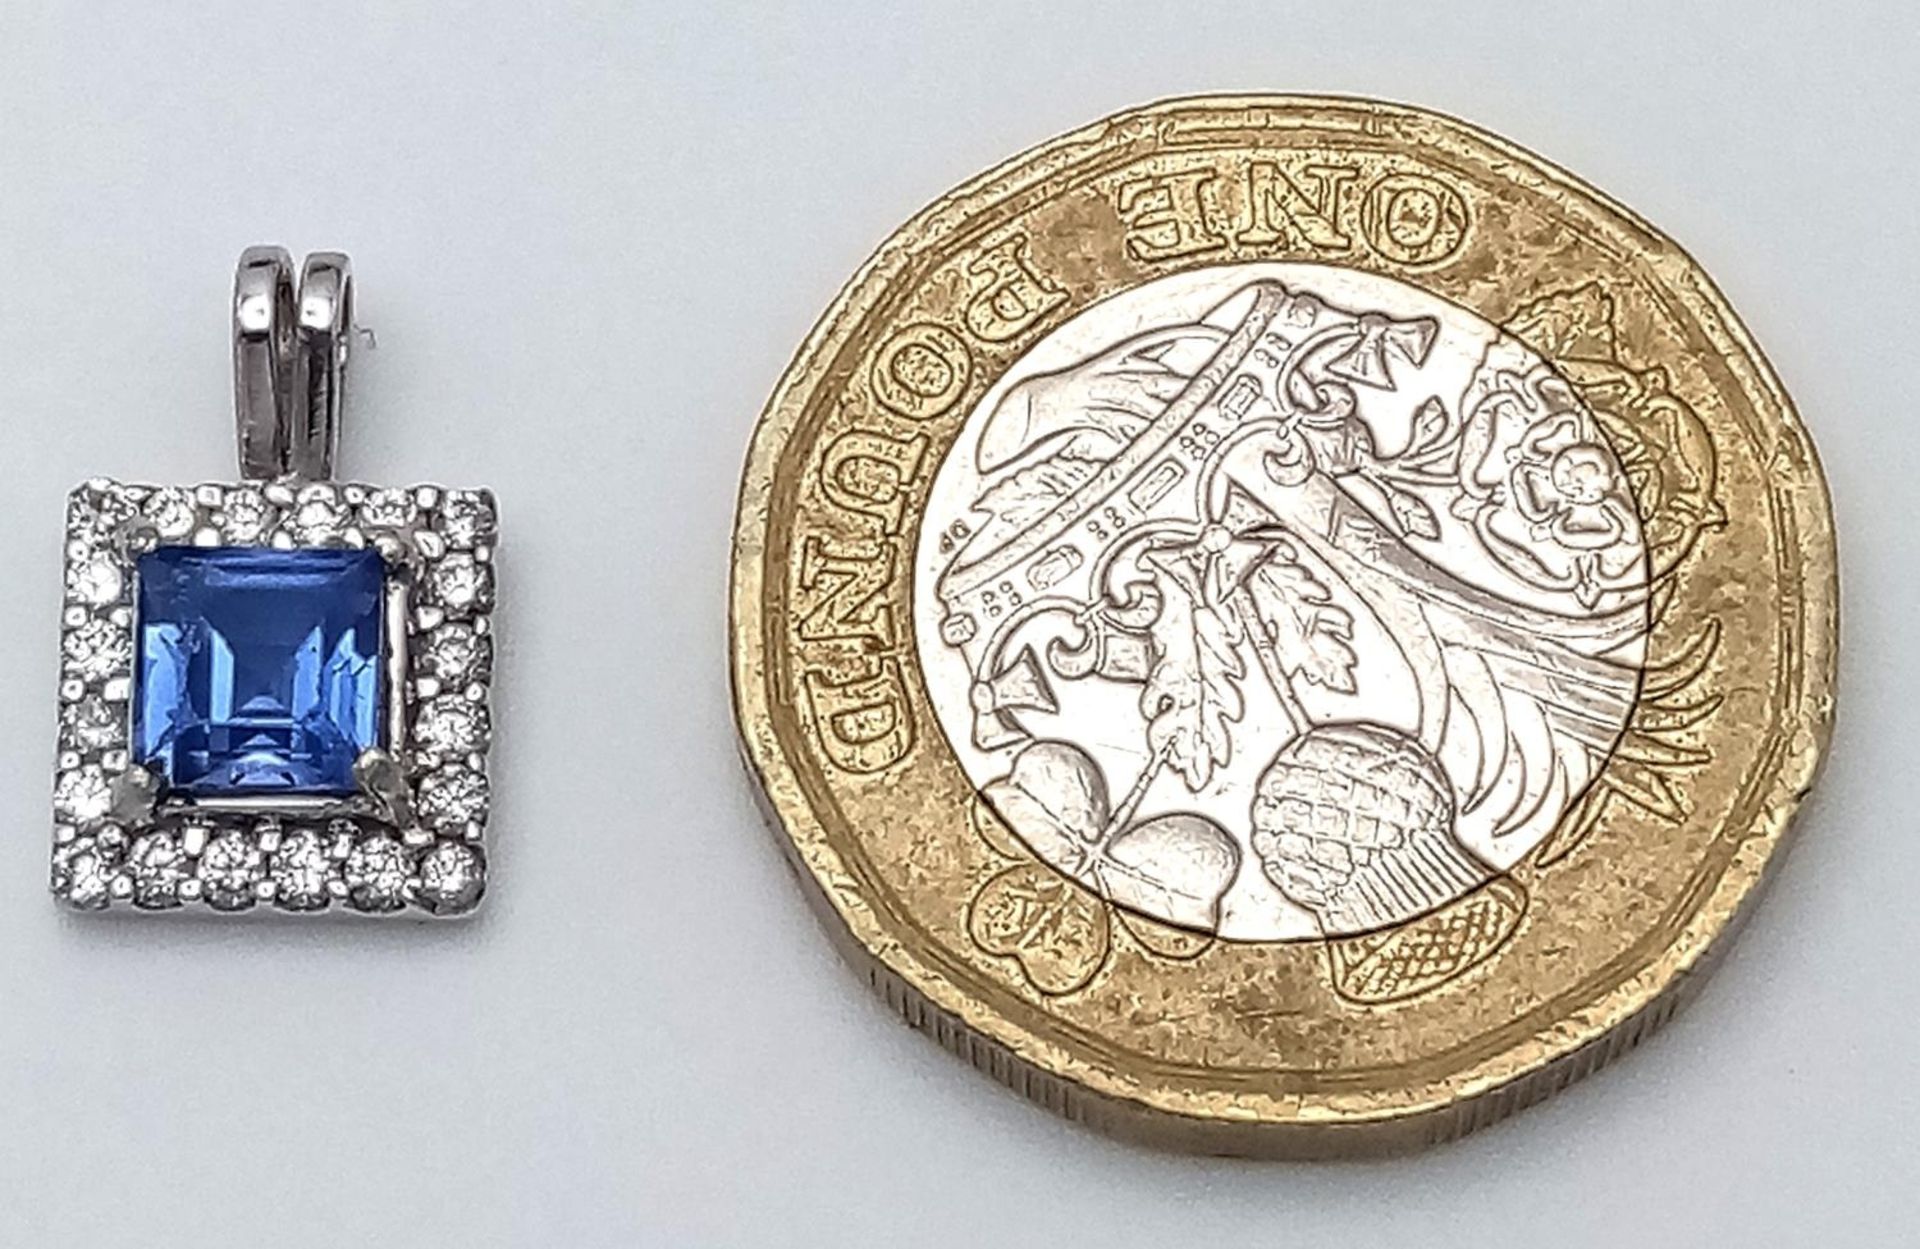 A 18K (TESTED AS) WHITE GOLD DIAMOND & SAPPHIRE PENDANT 1.02CT SAPPHIRE 1.6G. 14mm x 9mm. BL 9003 - Image 3 of 3